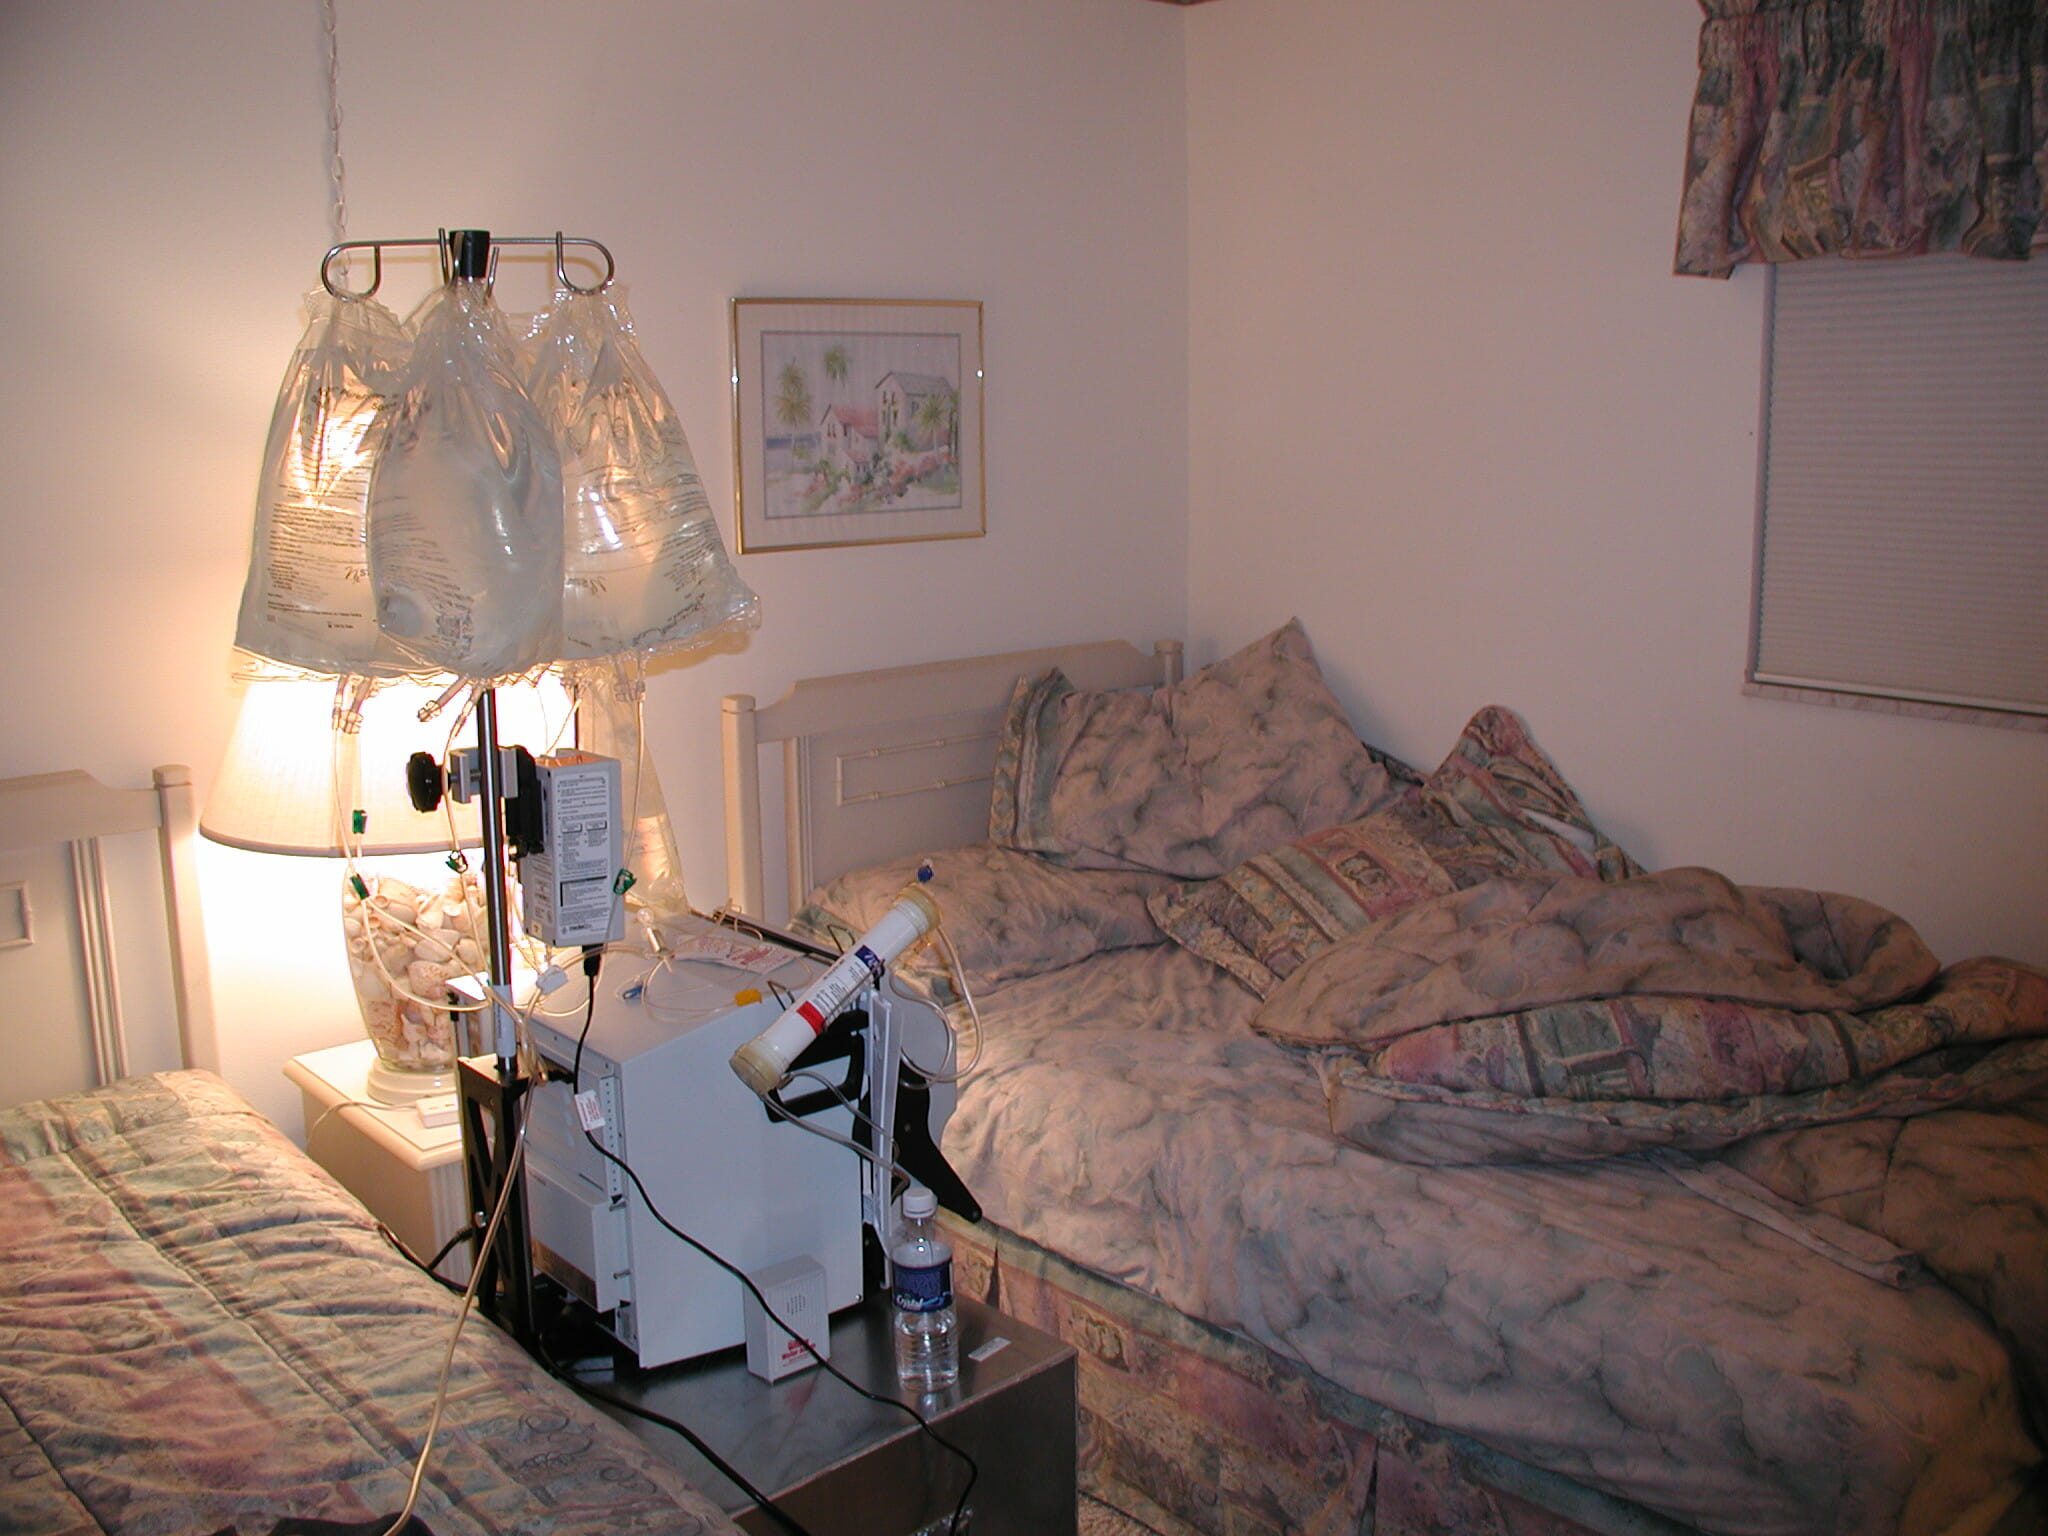 A hemodialysis machine in a bedroom. There would be great risk to the user of this machine if the utility company shut-off this home's electricity.